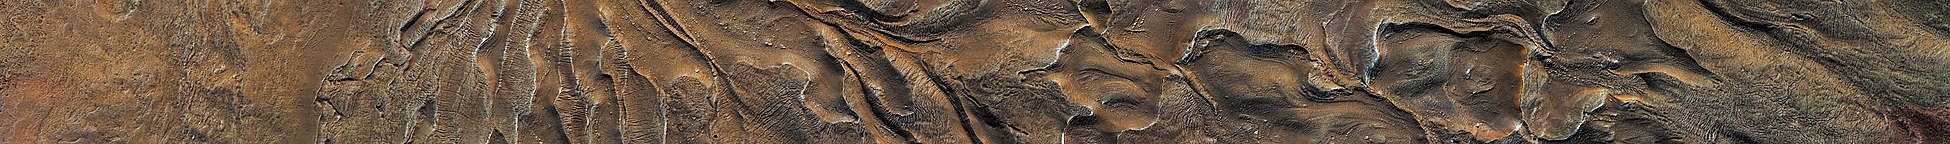 ESP 030341 1420 Search for Active Glacial Flow on Mars.jpg